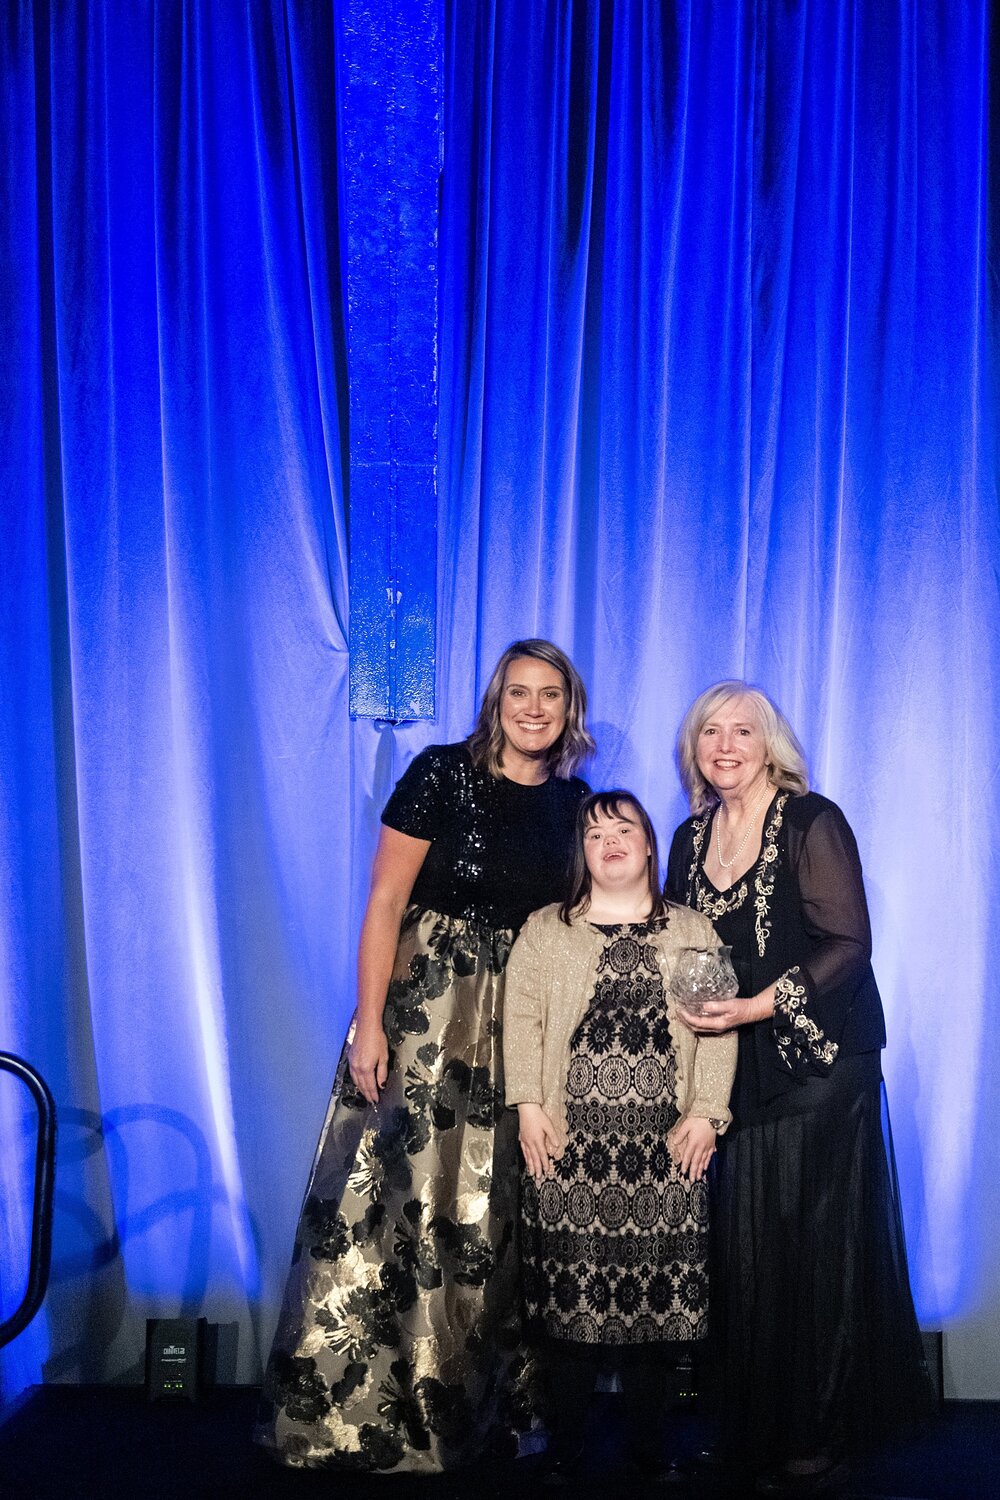 National Down Syndrome Society Winter Gala in NYC photographed by NDSS advocate and photographer Wendy Zook Photography